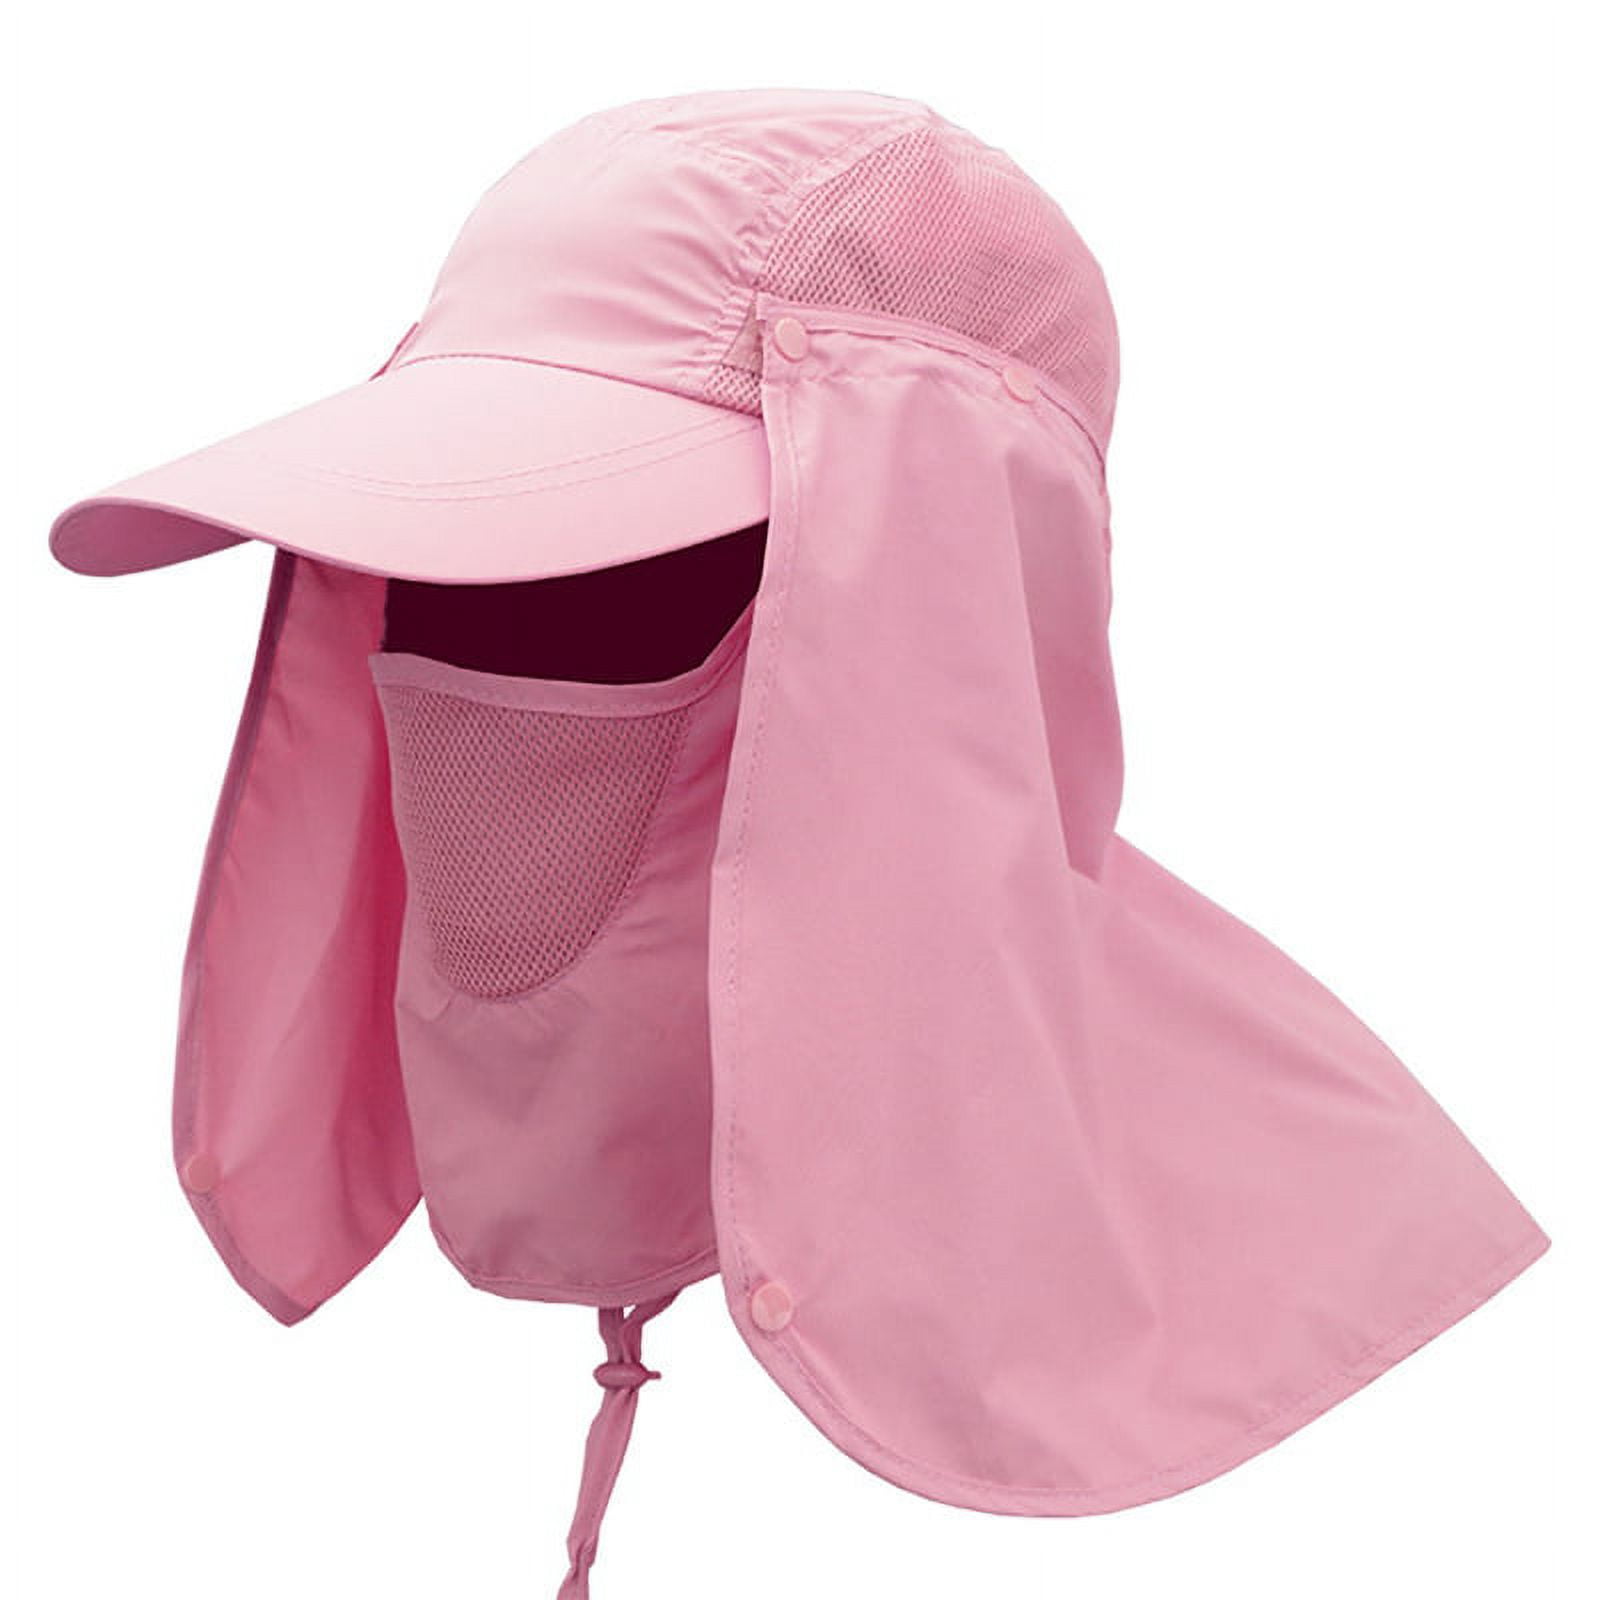 Harmtty Fishing Hat Windproof Quick Dry Hook Loop Fasteners Neck Gaitor Cover Flap Baseball Cap for Home,Pink, Women's, Size: One size, Gray